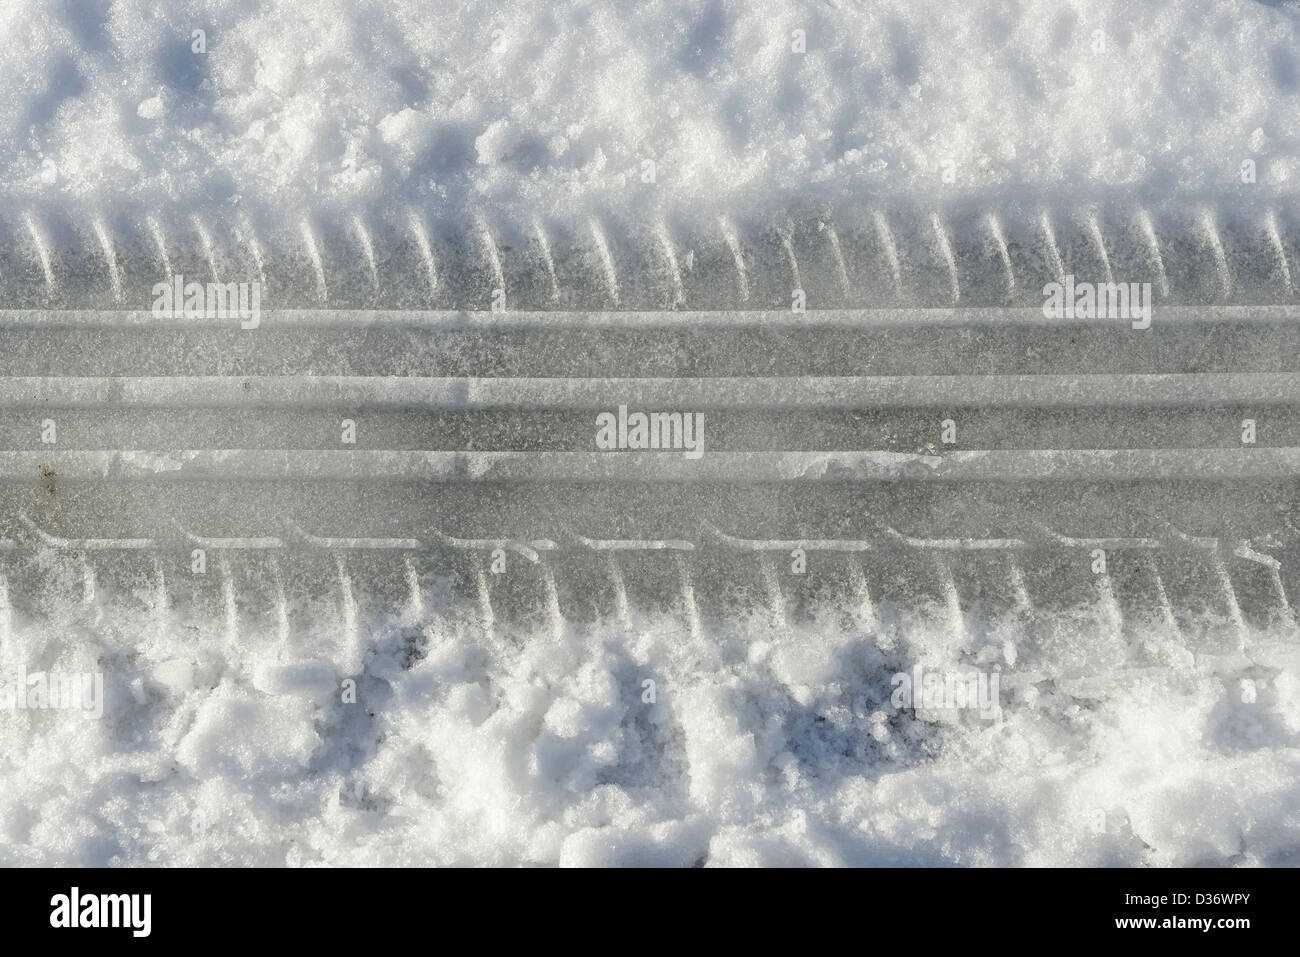 Car tyre track in snow Stock Photo